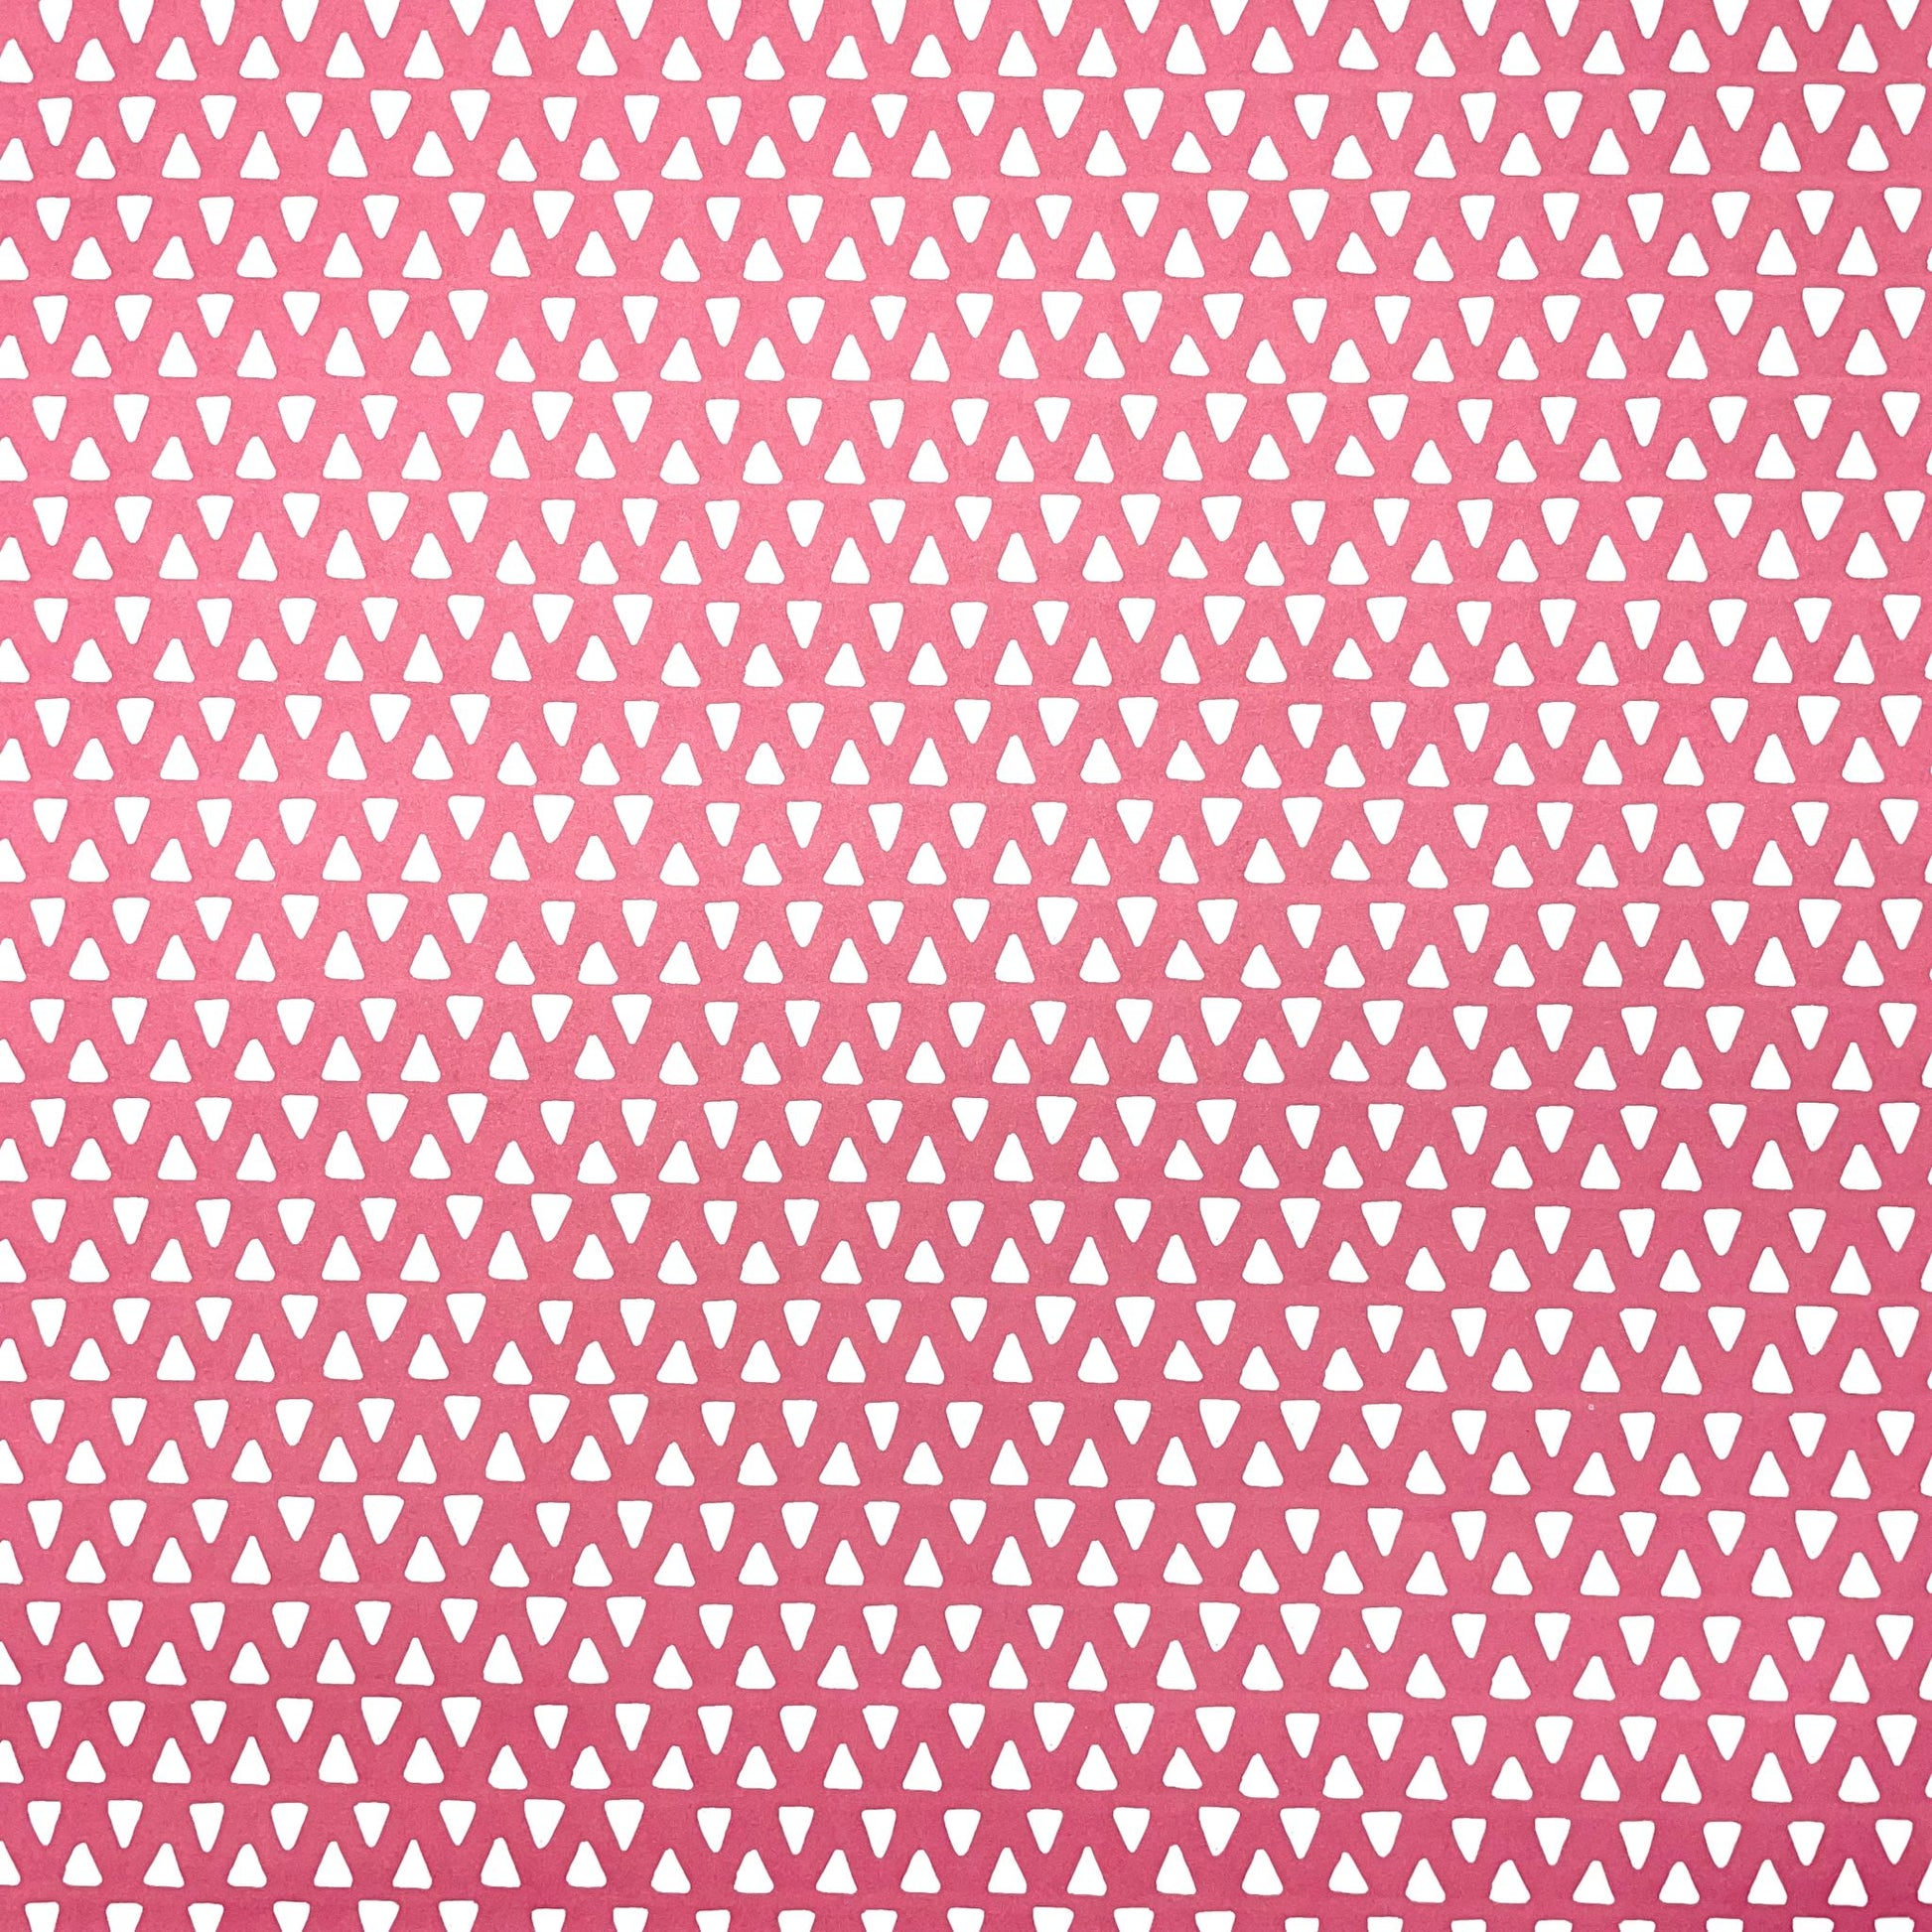 wrapping paper with pink background and repeat pattern of little white triangles by Heather Evelyn